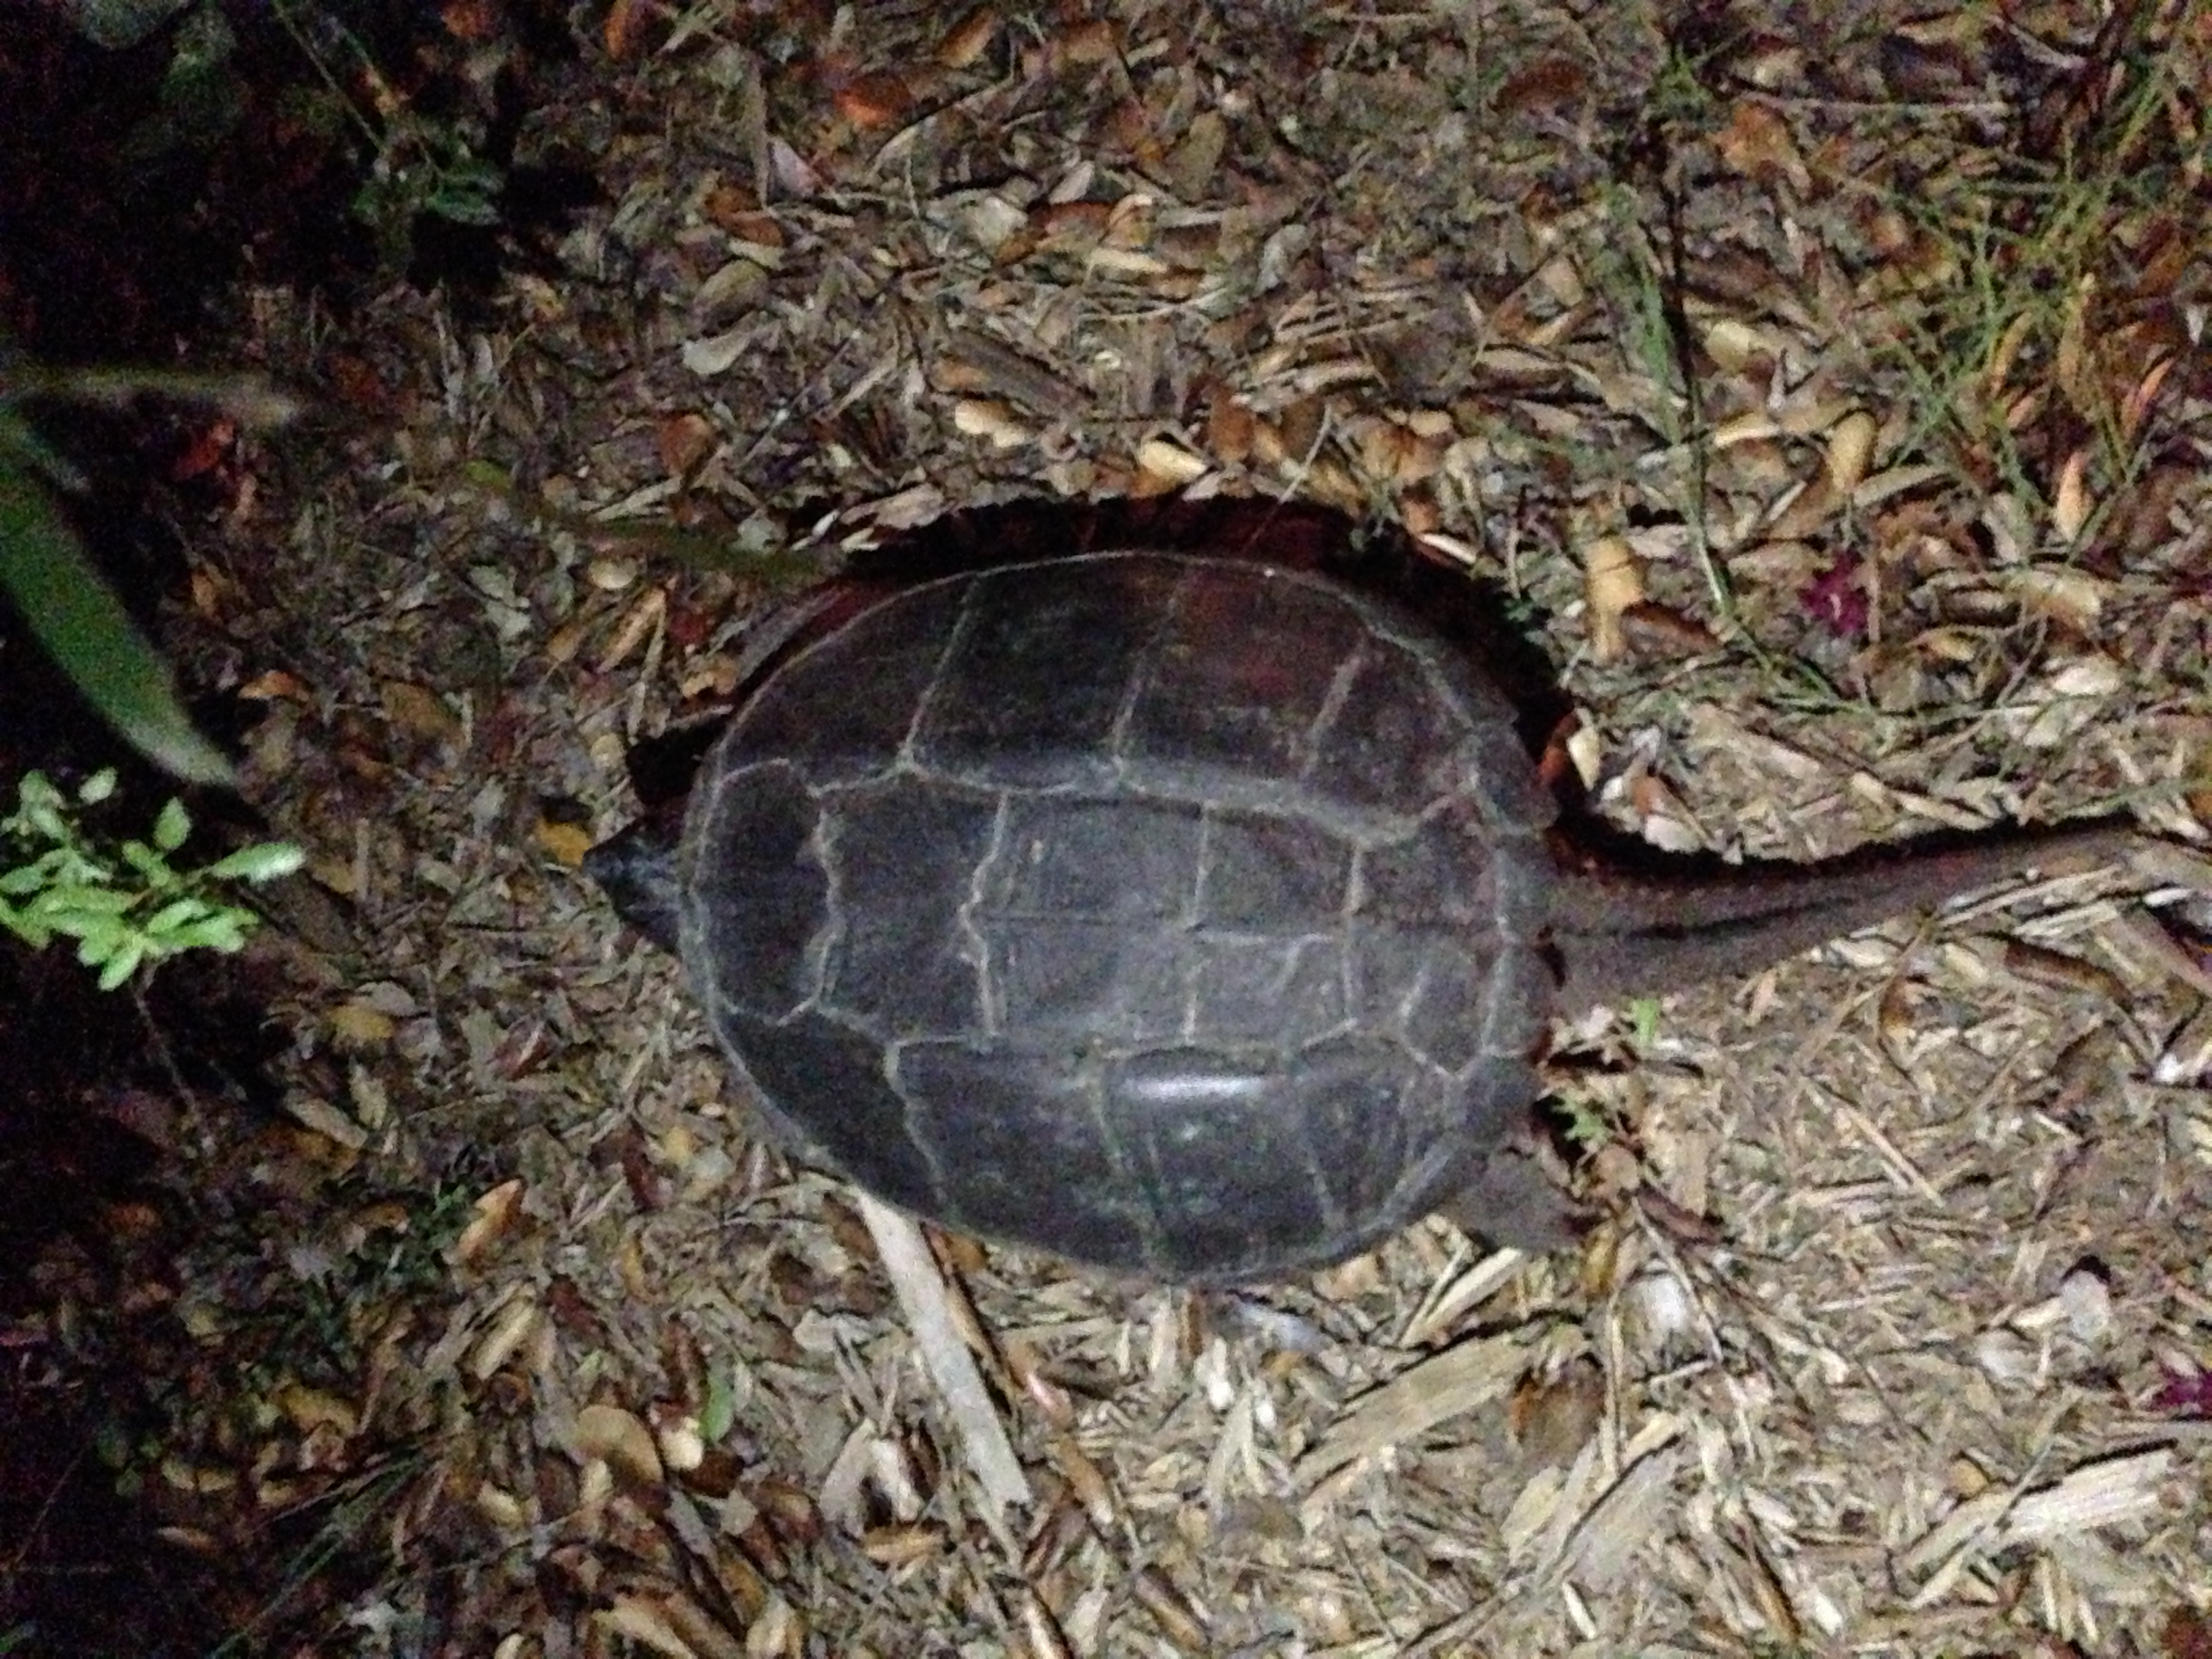 a turtle or another reptile